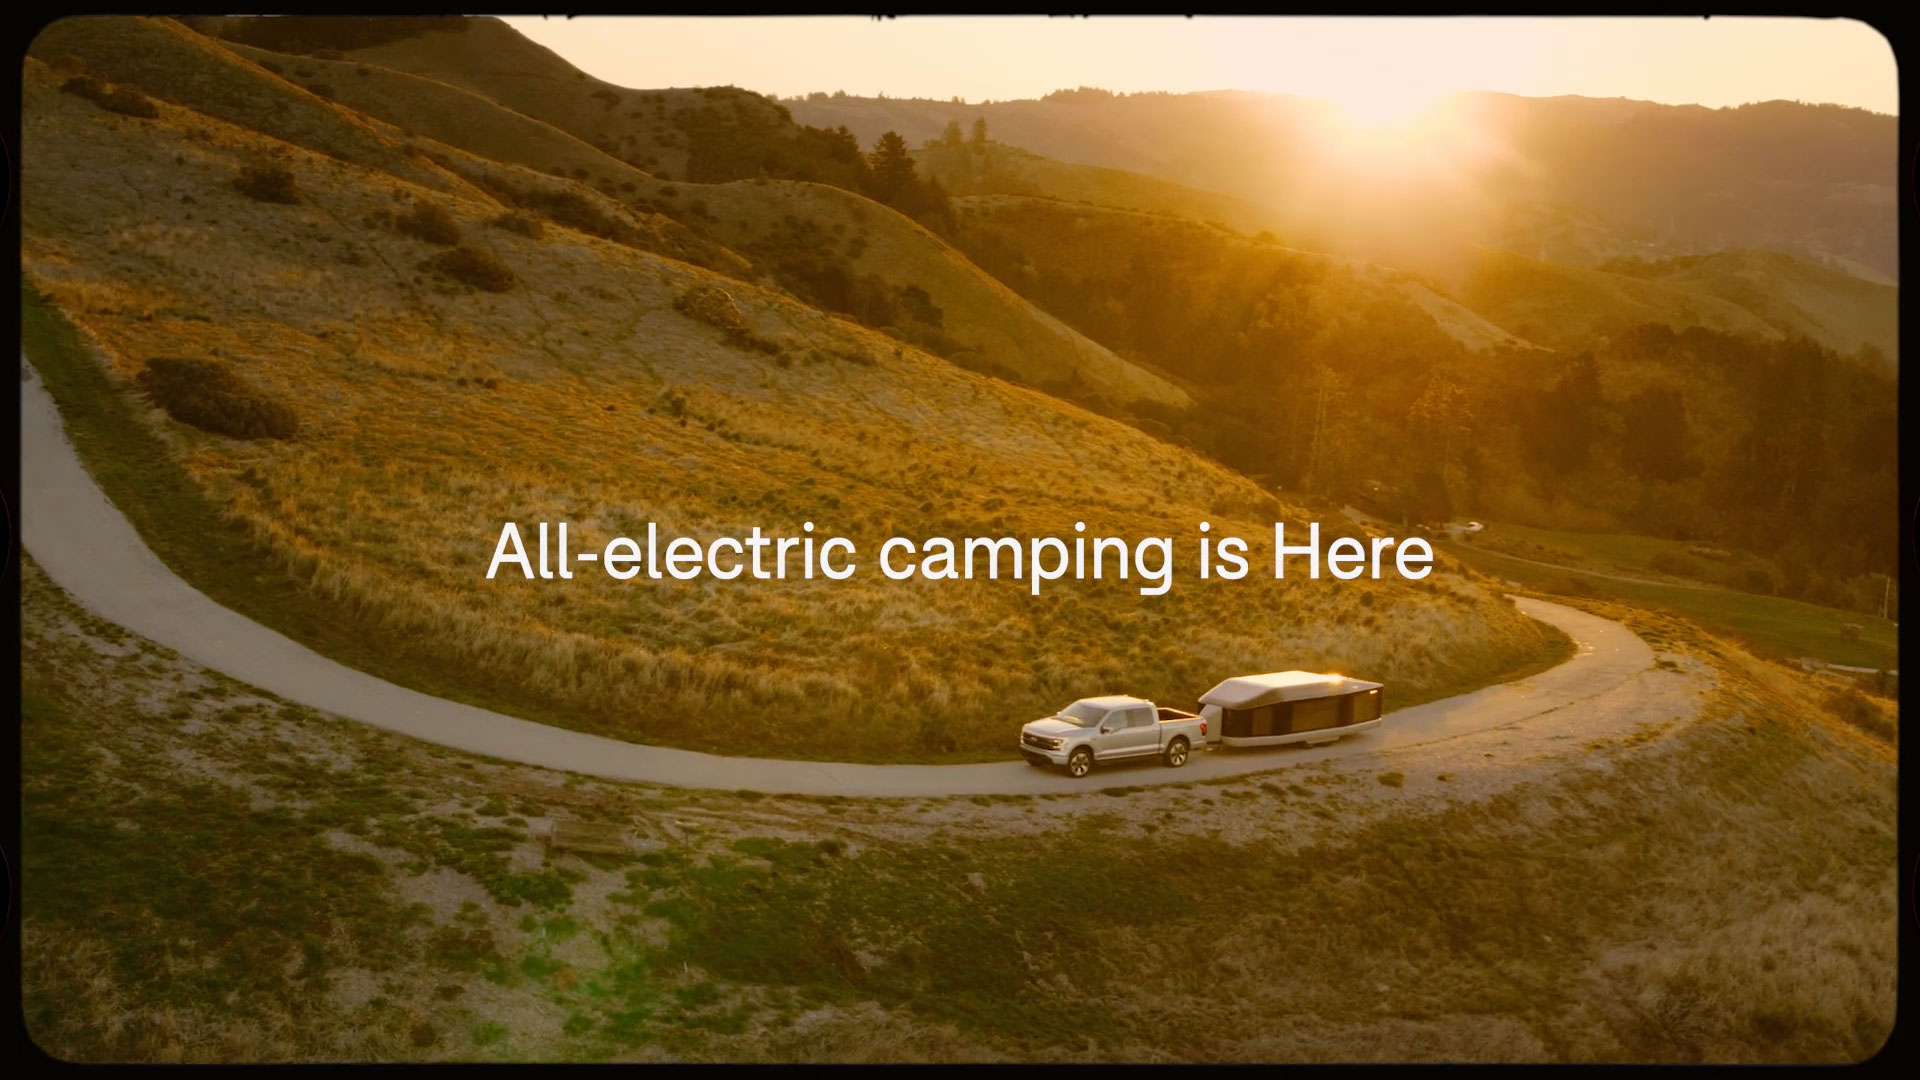 Lightship is taking a clean-sheet approach to building an all-electric RV, leveraging their experience in automotive EV development and design, and combining it with modern amenities and connectivity to create an electric travel trailer like no other.